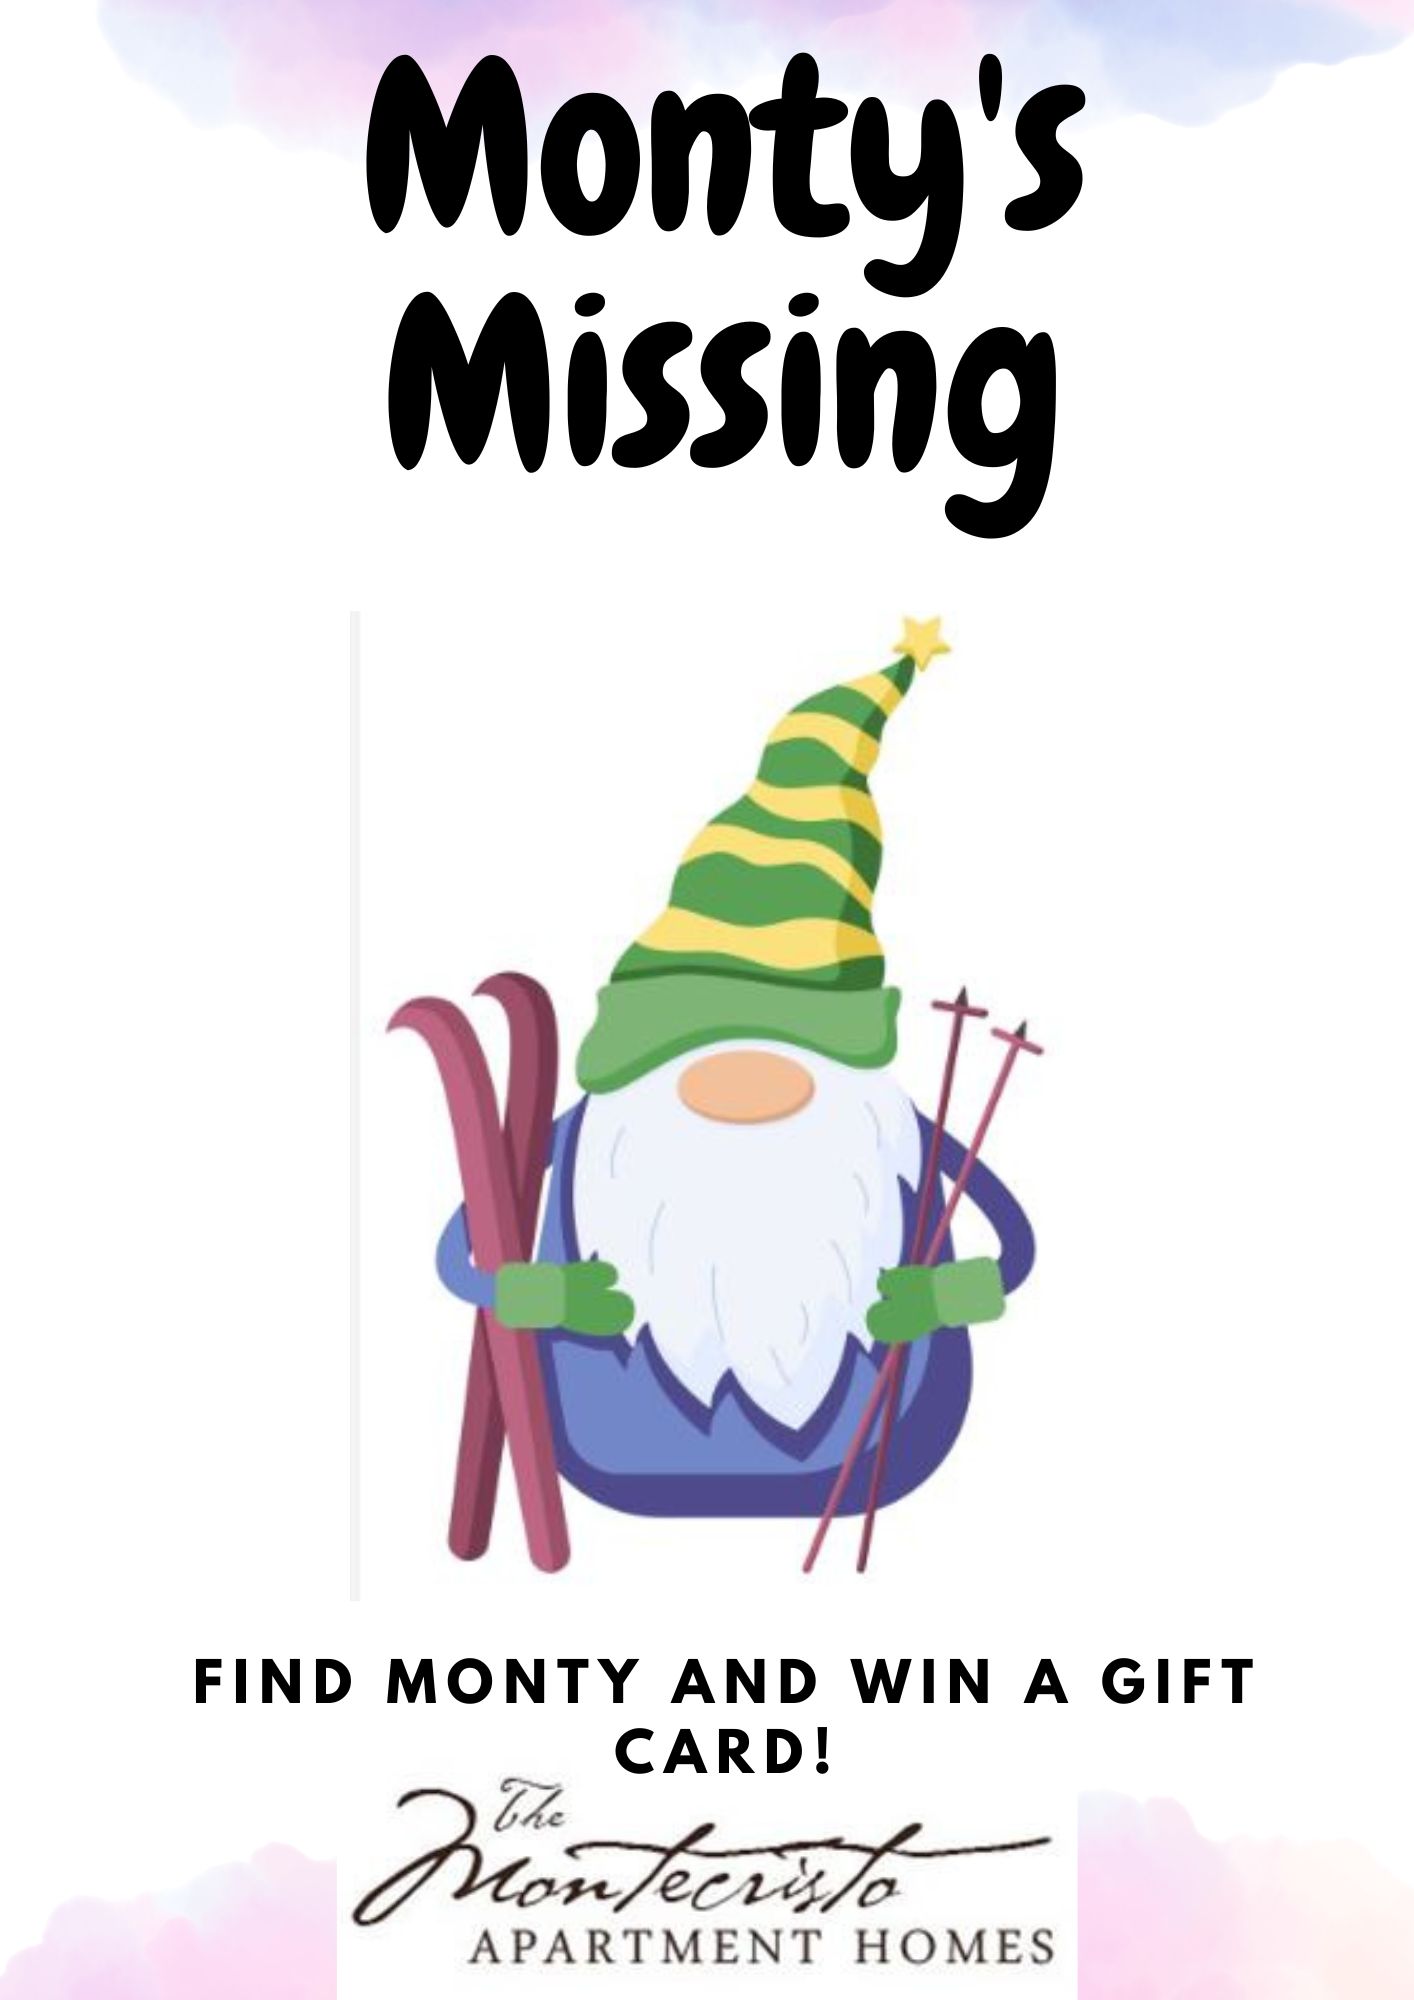 Find Monty at The Montecristo Apartments in Stone Oak, San Antonio and win a gift card.